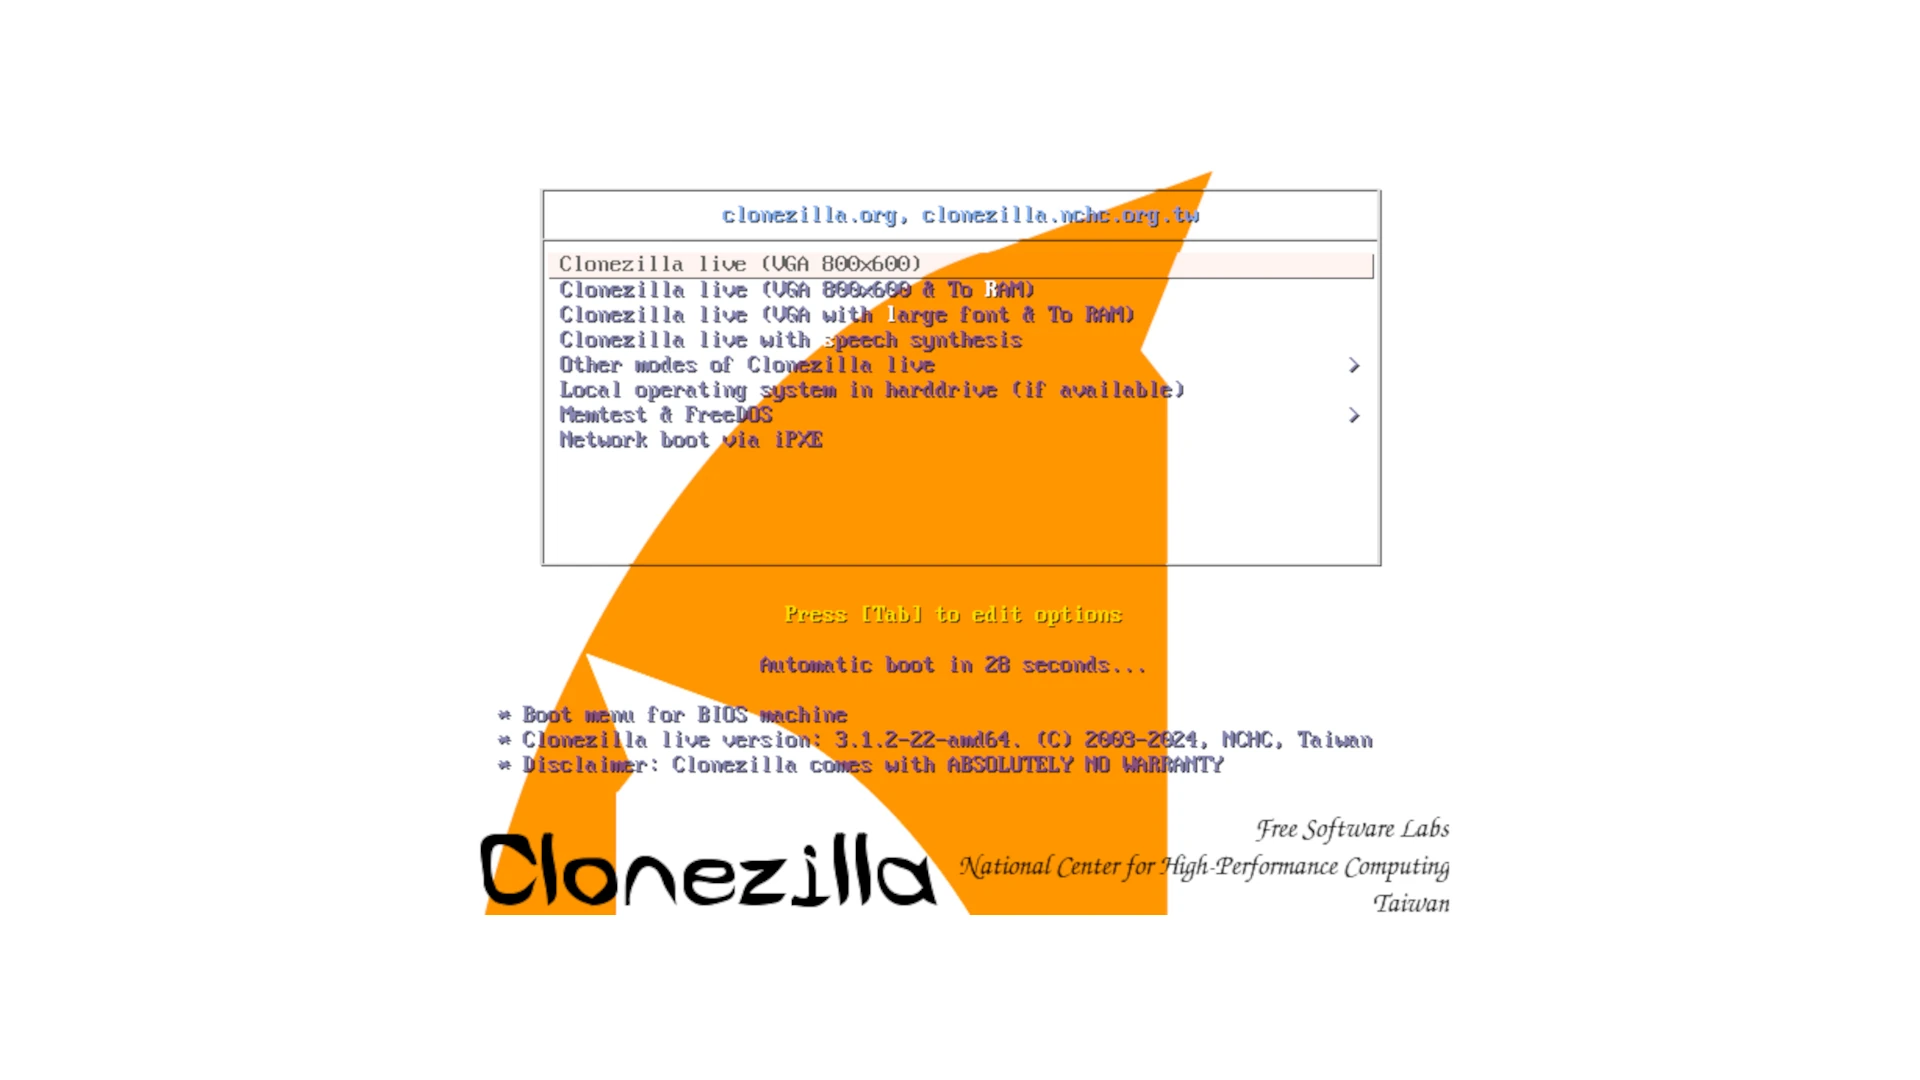 Clonezilla Live Is Now Patched Against the XZ Backdoor, Powered by Linux 6.7